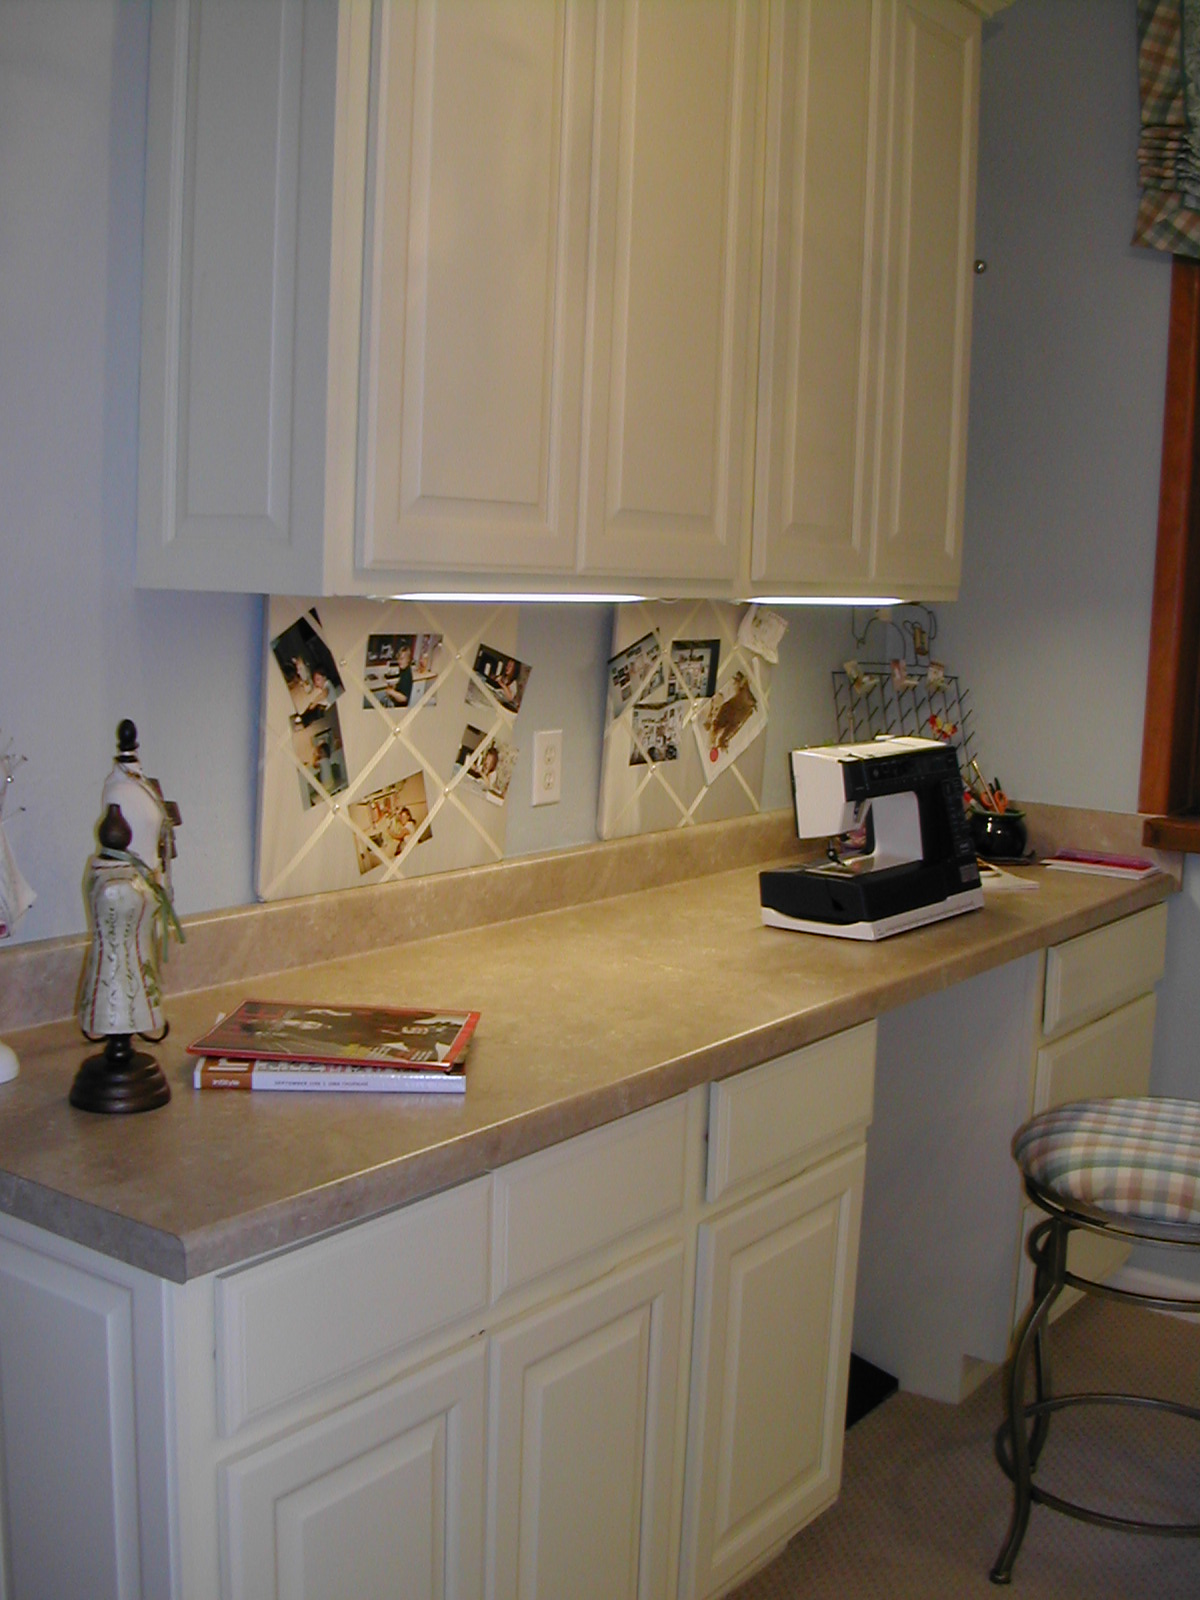 Marie Antoinette Interiors: Sprucing Up Your Laundry Room!